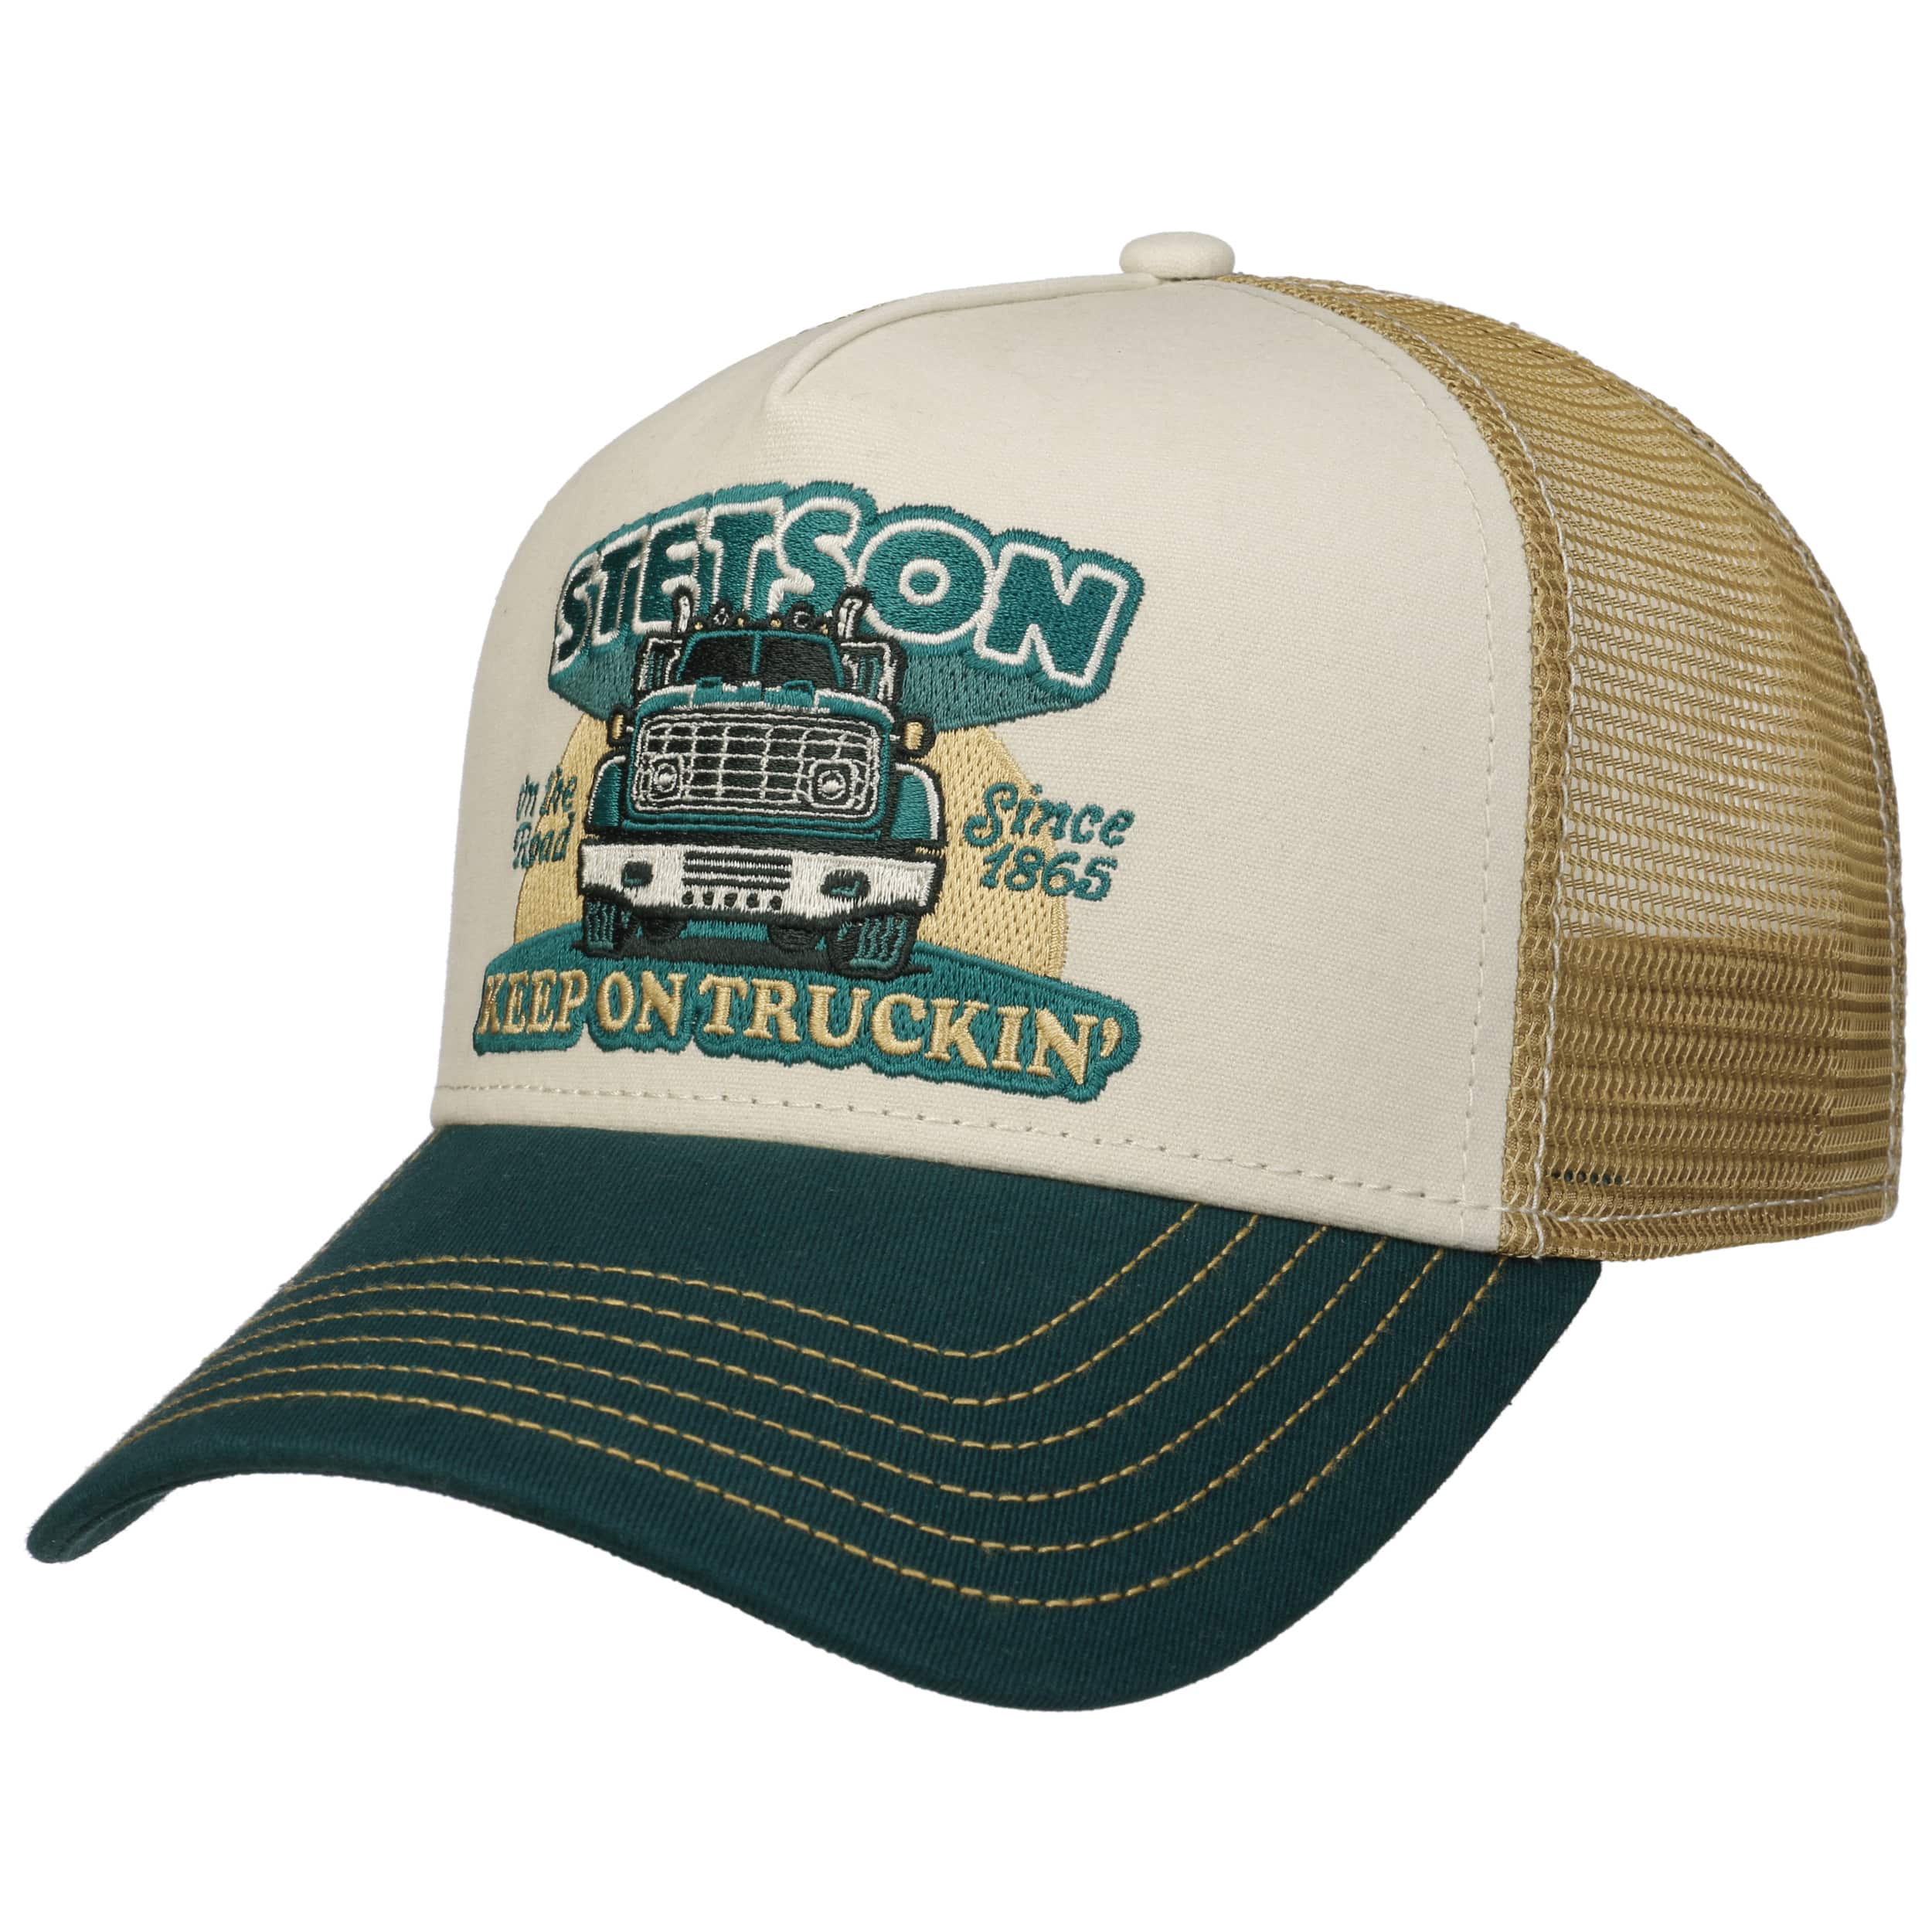 By The Campfire Trucker Cap by Stetson - 49,00 €